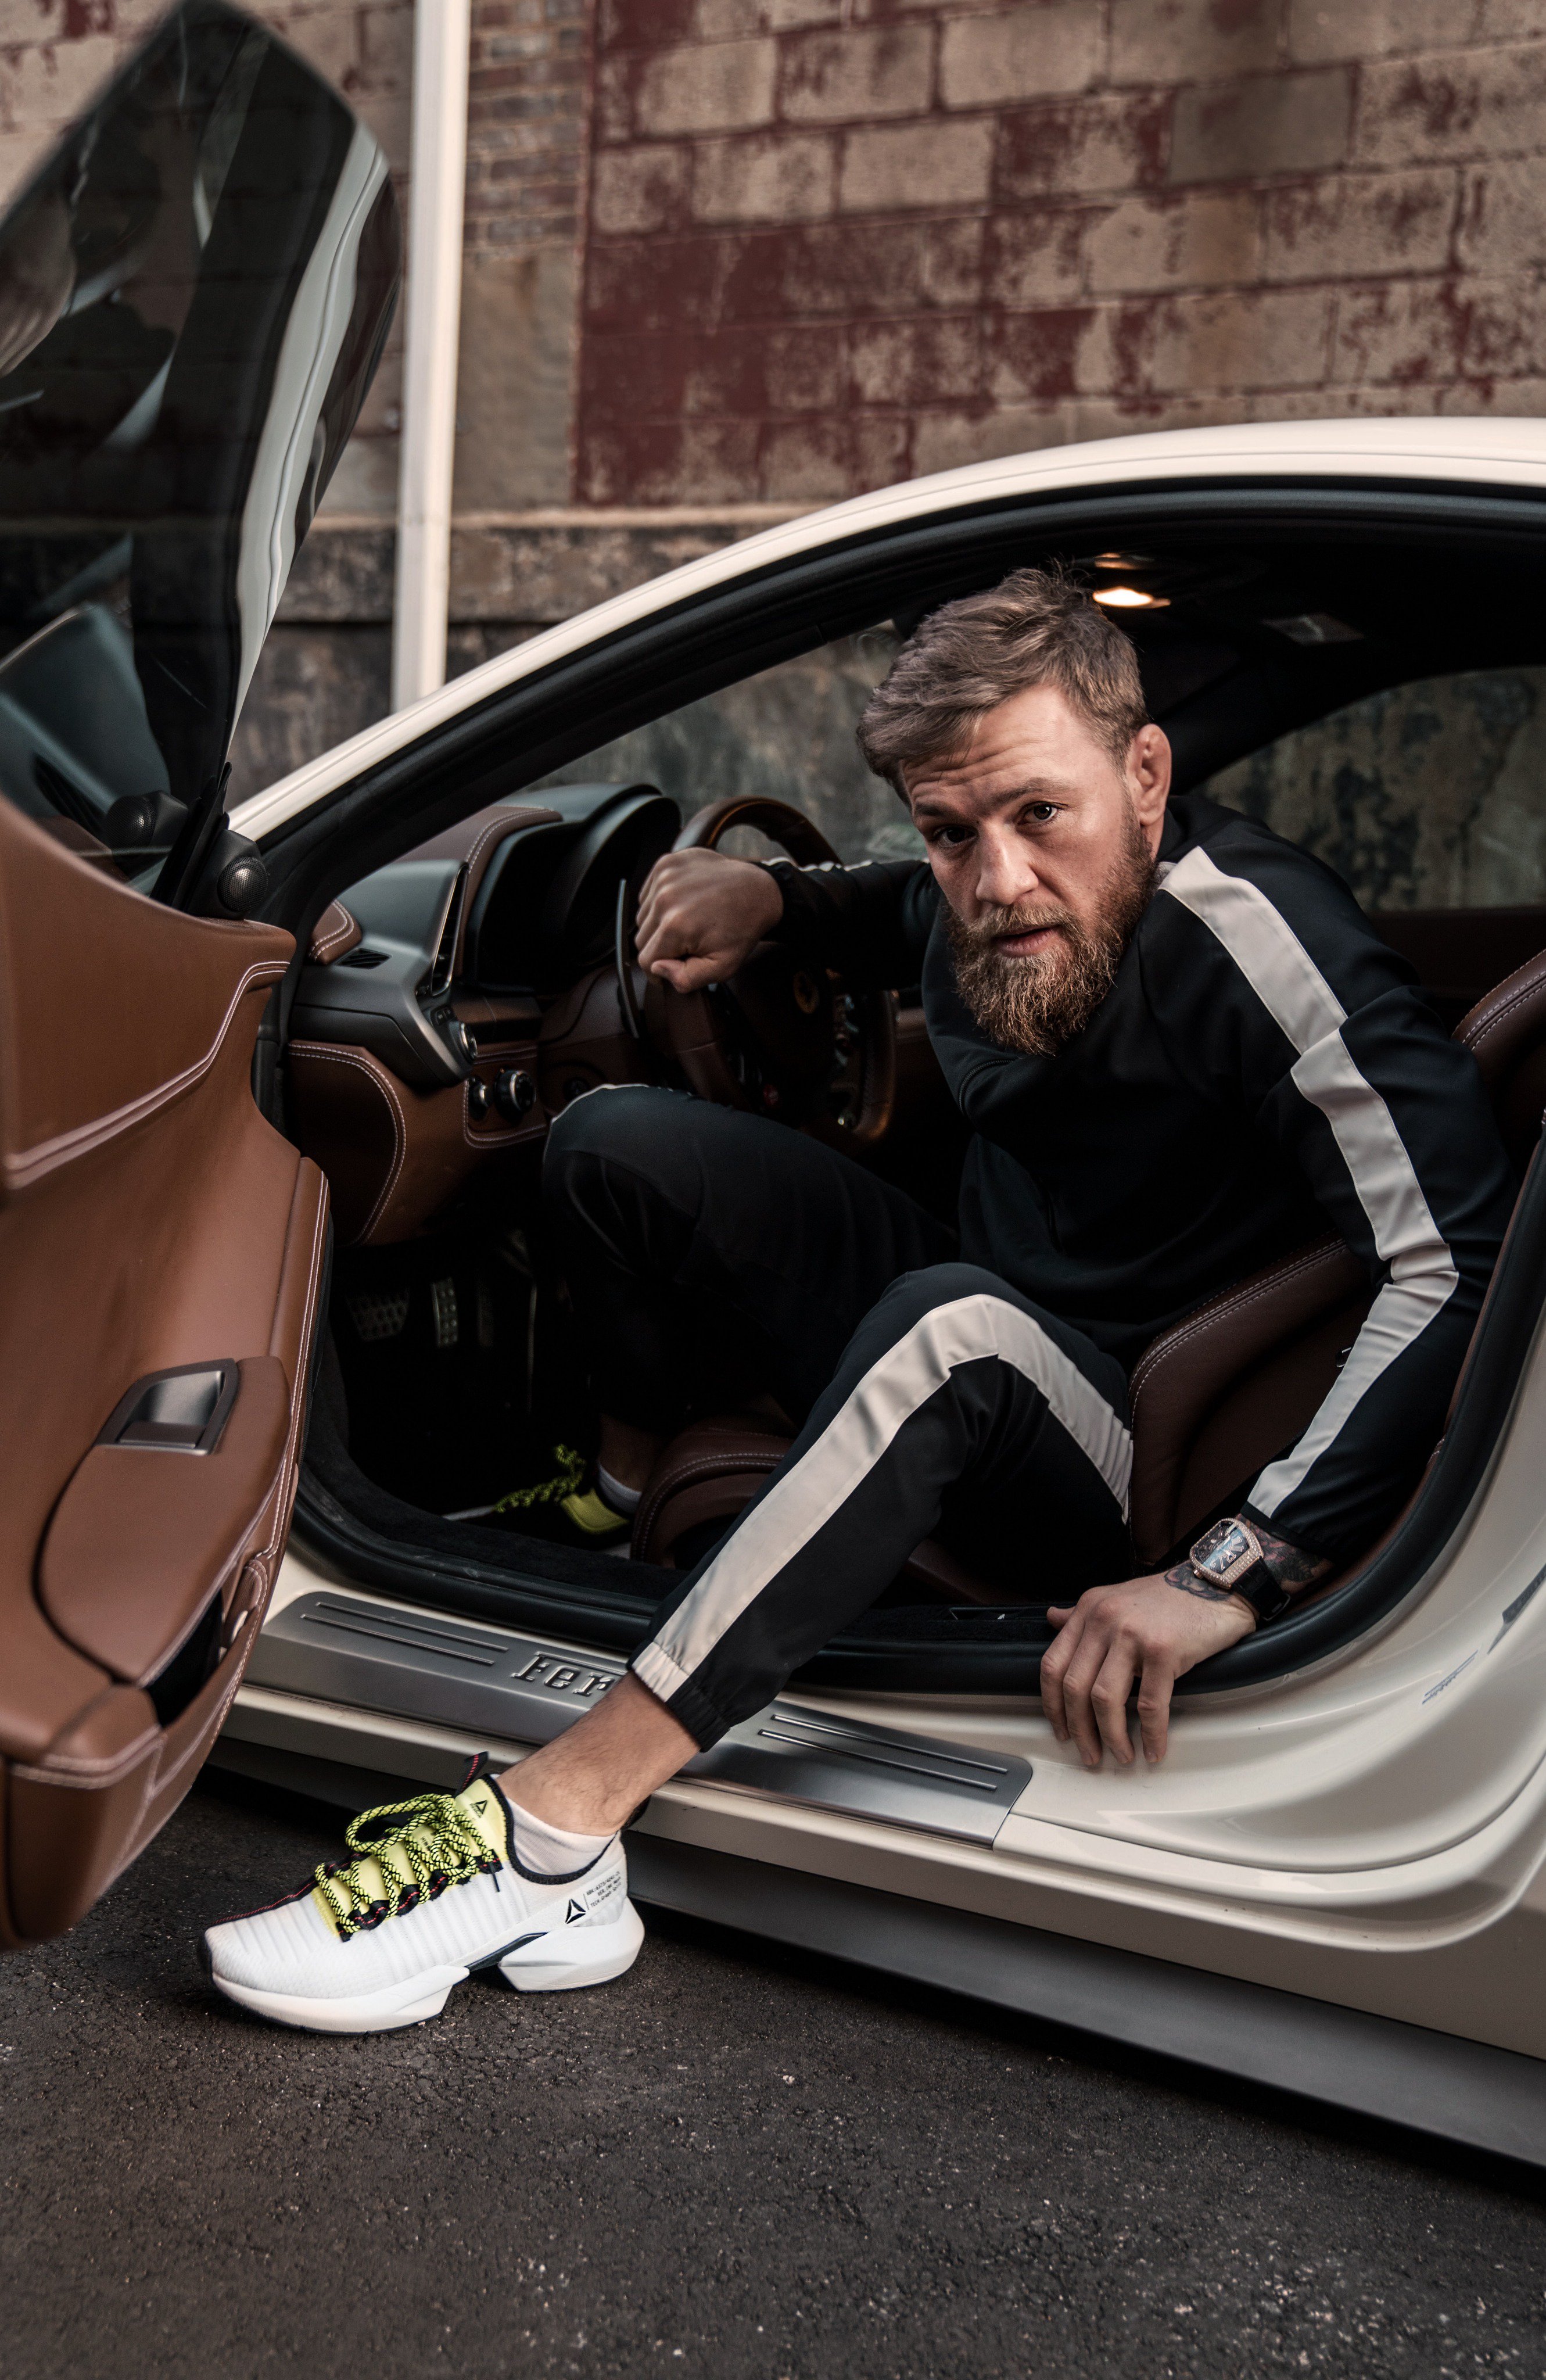 Conor McGregor on Twitter: new Sole Fury's from my team at Reebok. shoes will always be better than yours! #SplitFrom | @Reebok 's new #SoleFury https://t.co/PLrhmHa3rt" / Twitter